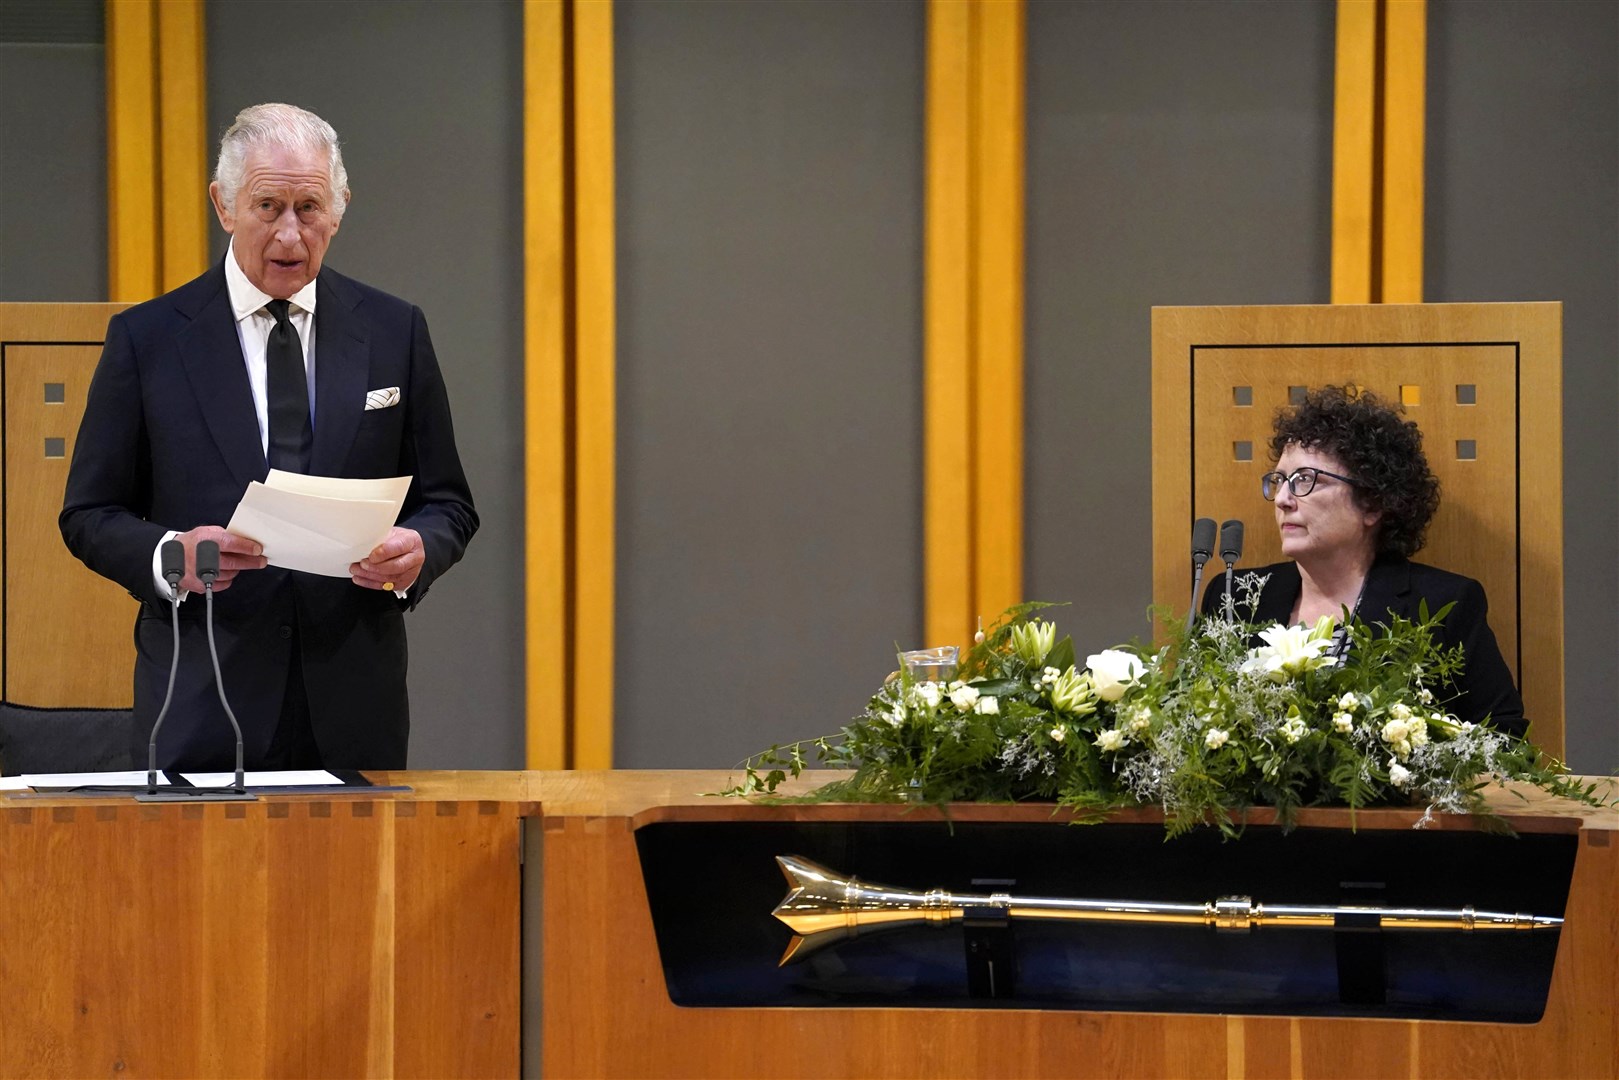 The King speaking after receiving a motion of condolence at the Senedd in Cardiff (Andrew Matthews/PA)